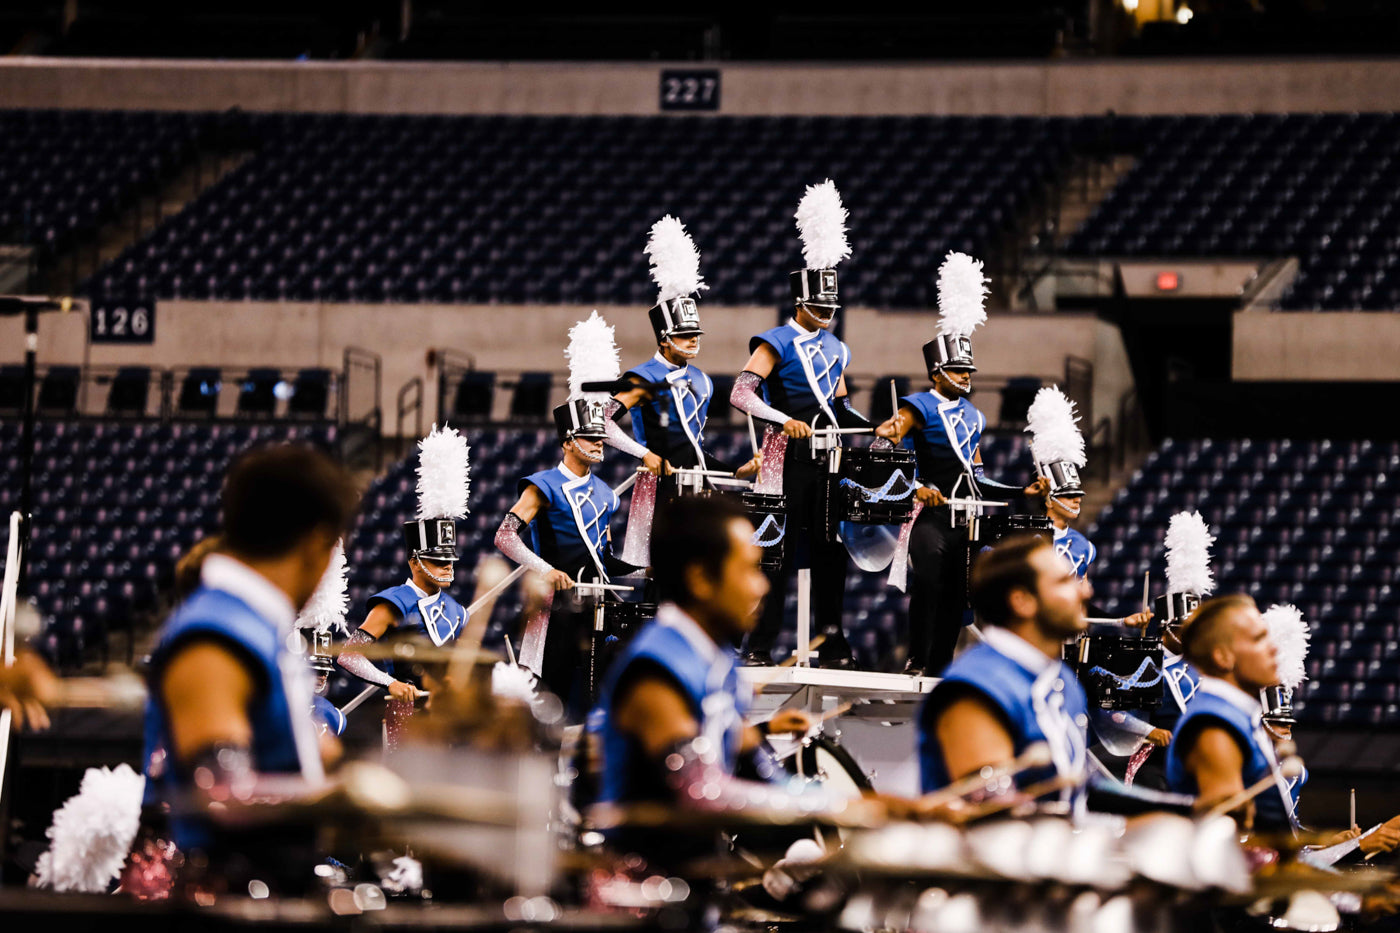 Music and Marching DCI 2017 - Lot Riot Blog